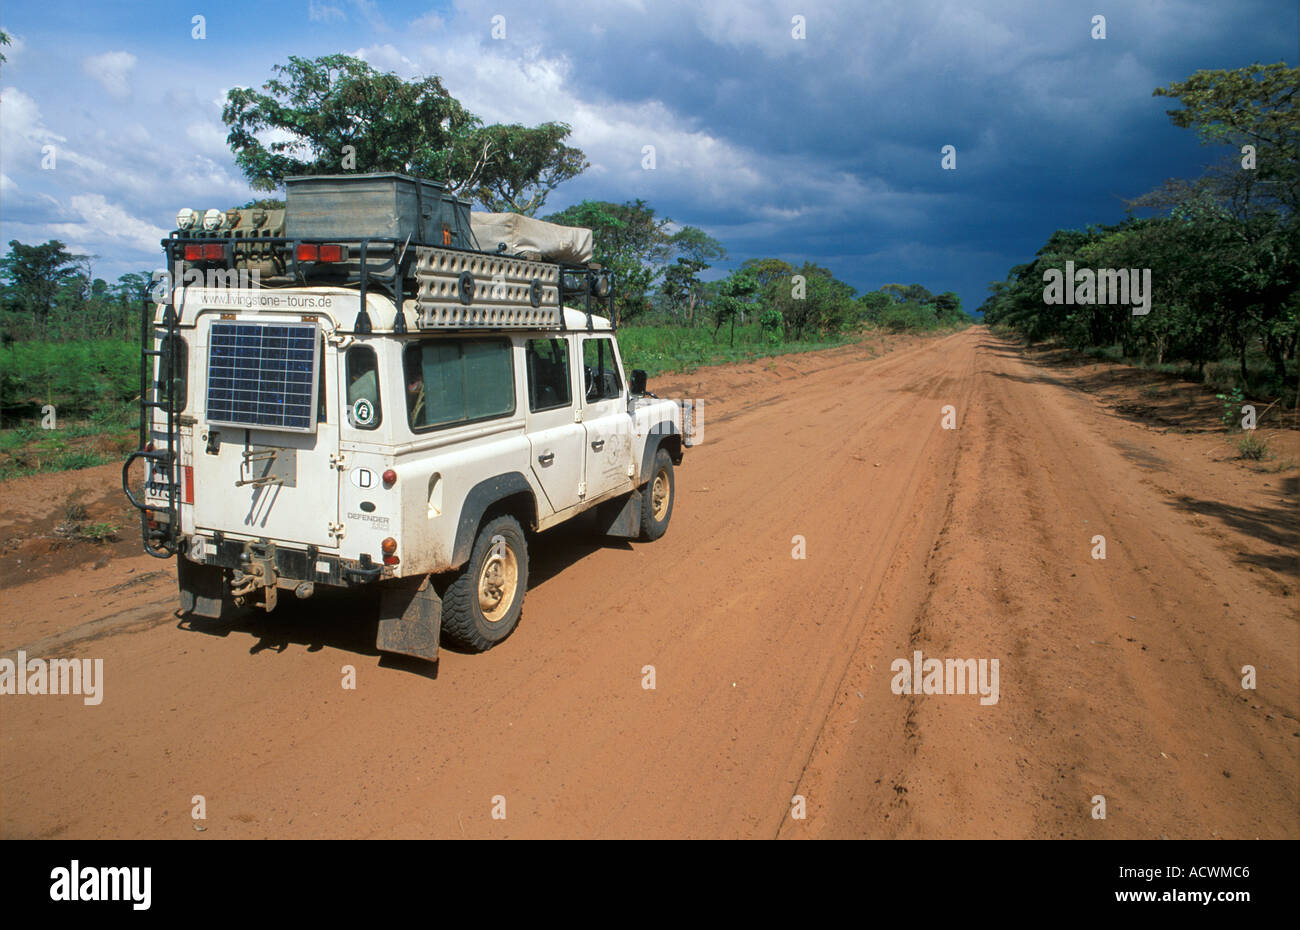 Landrover on a lonely dirt road in the northeast of Zambia Stock Photo